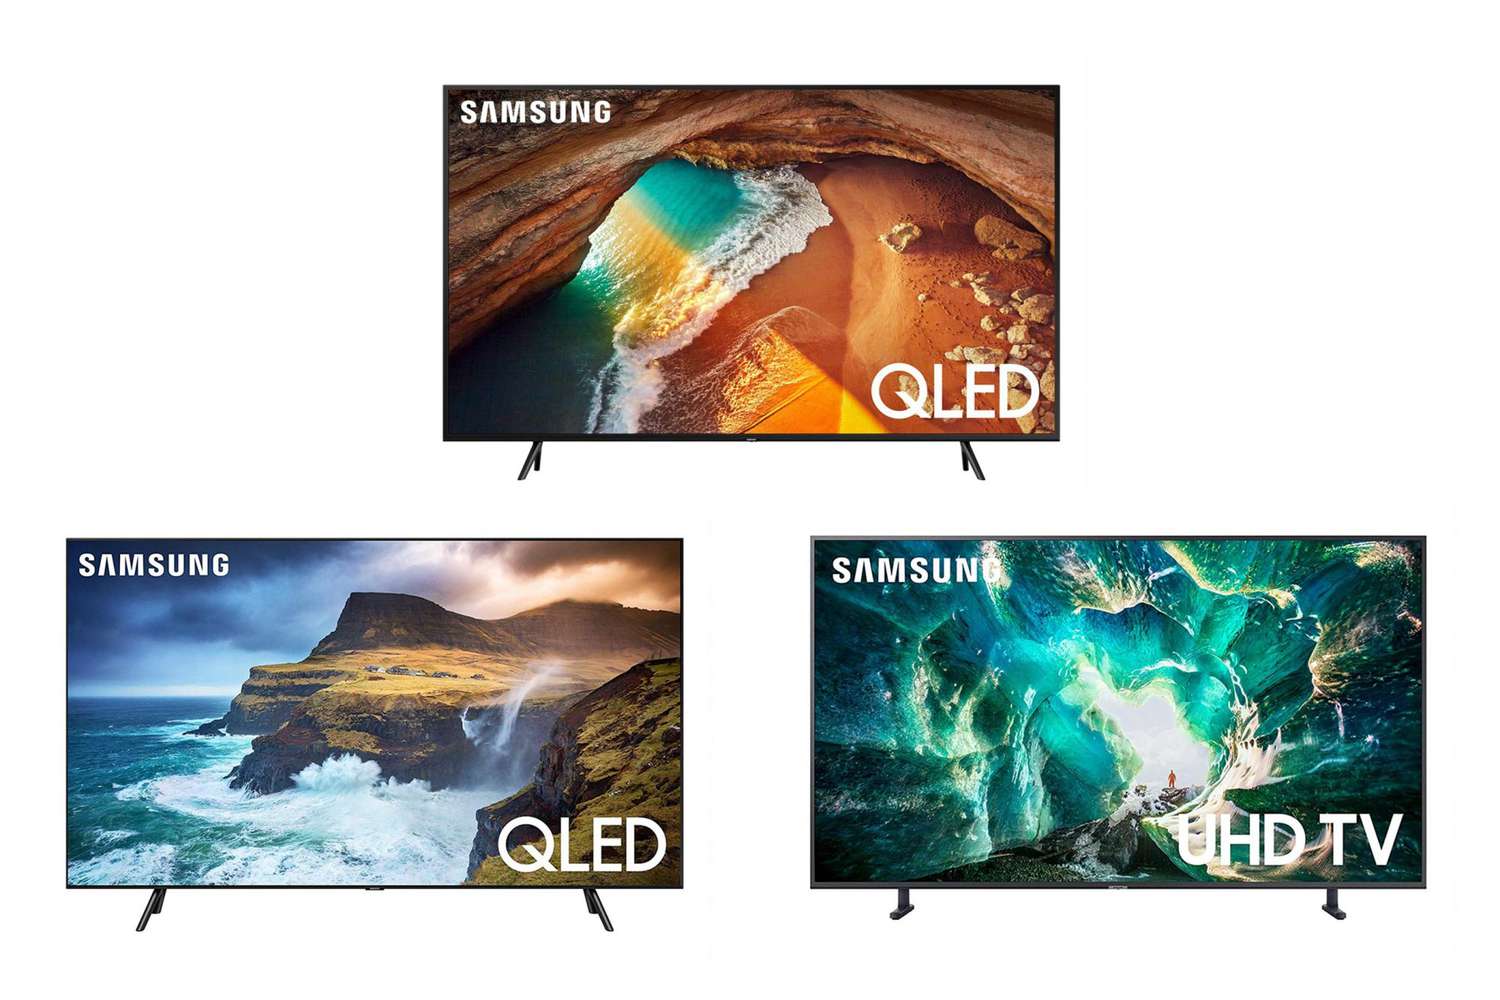 31 Cyber Monday TV deals from Walmart, Amazon, and Best Buy | 0